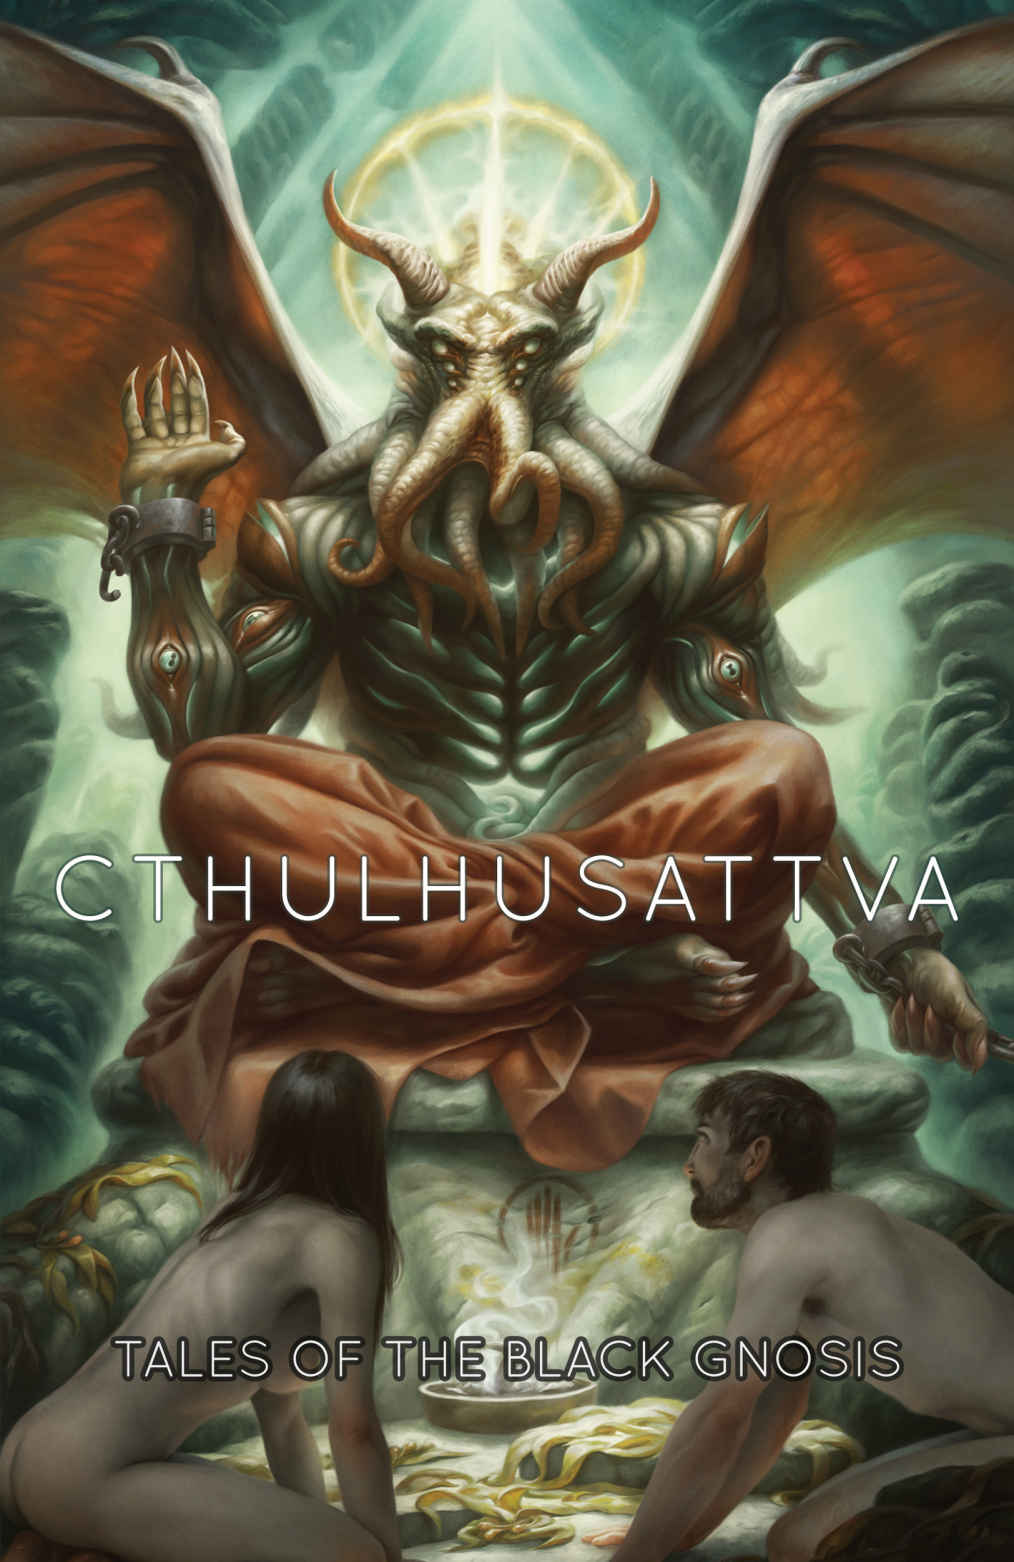 Cthulhusattva: Tales of the Black Gnosis